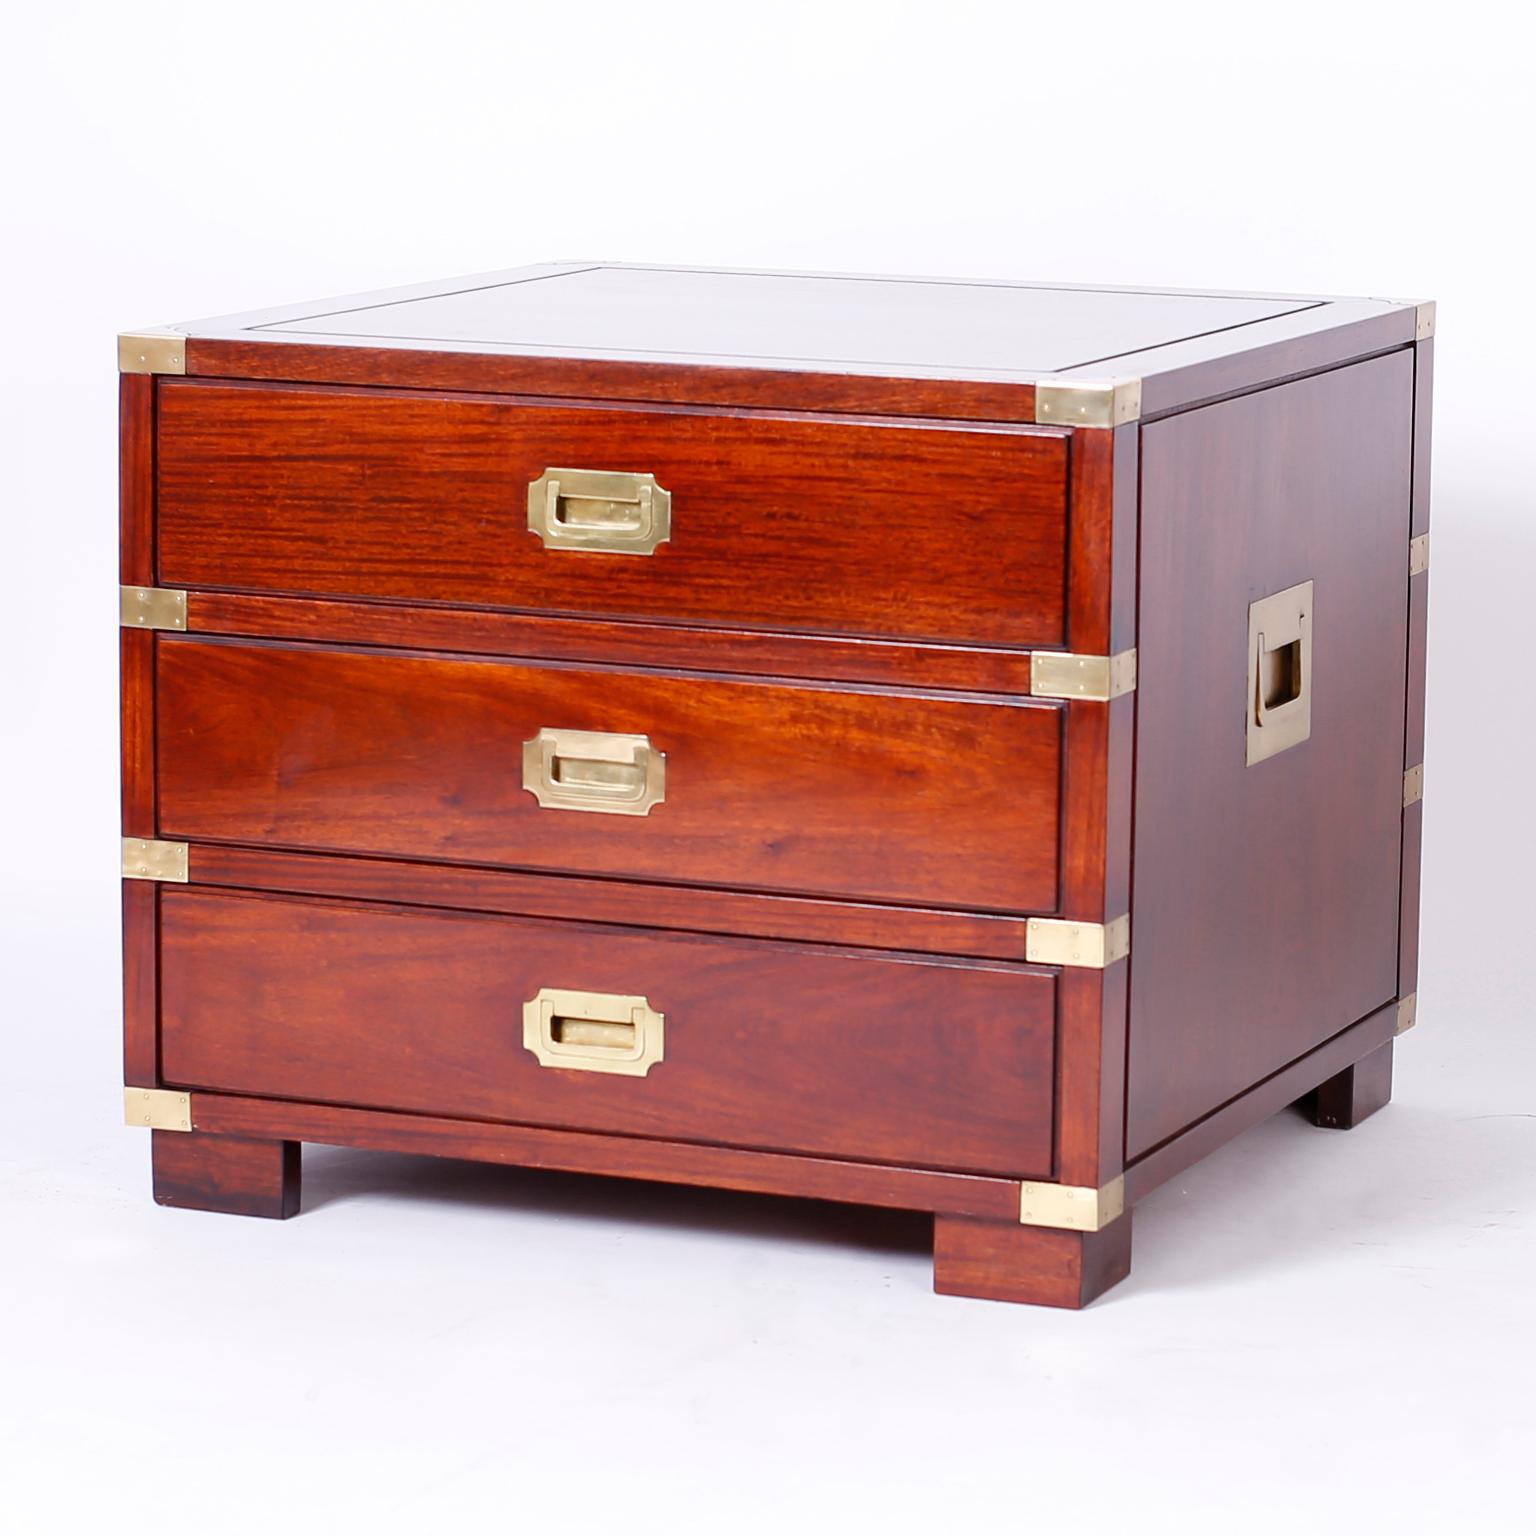 British Colonial Rosewood Campaign Style Nightstands or Chests